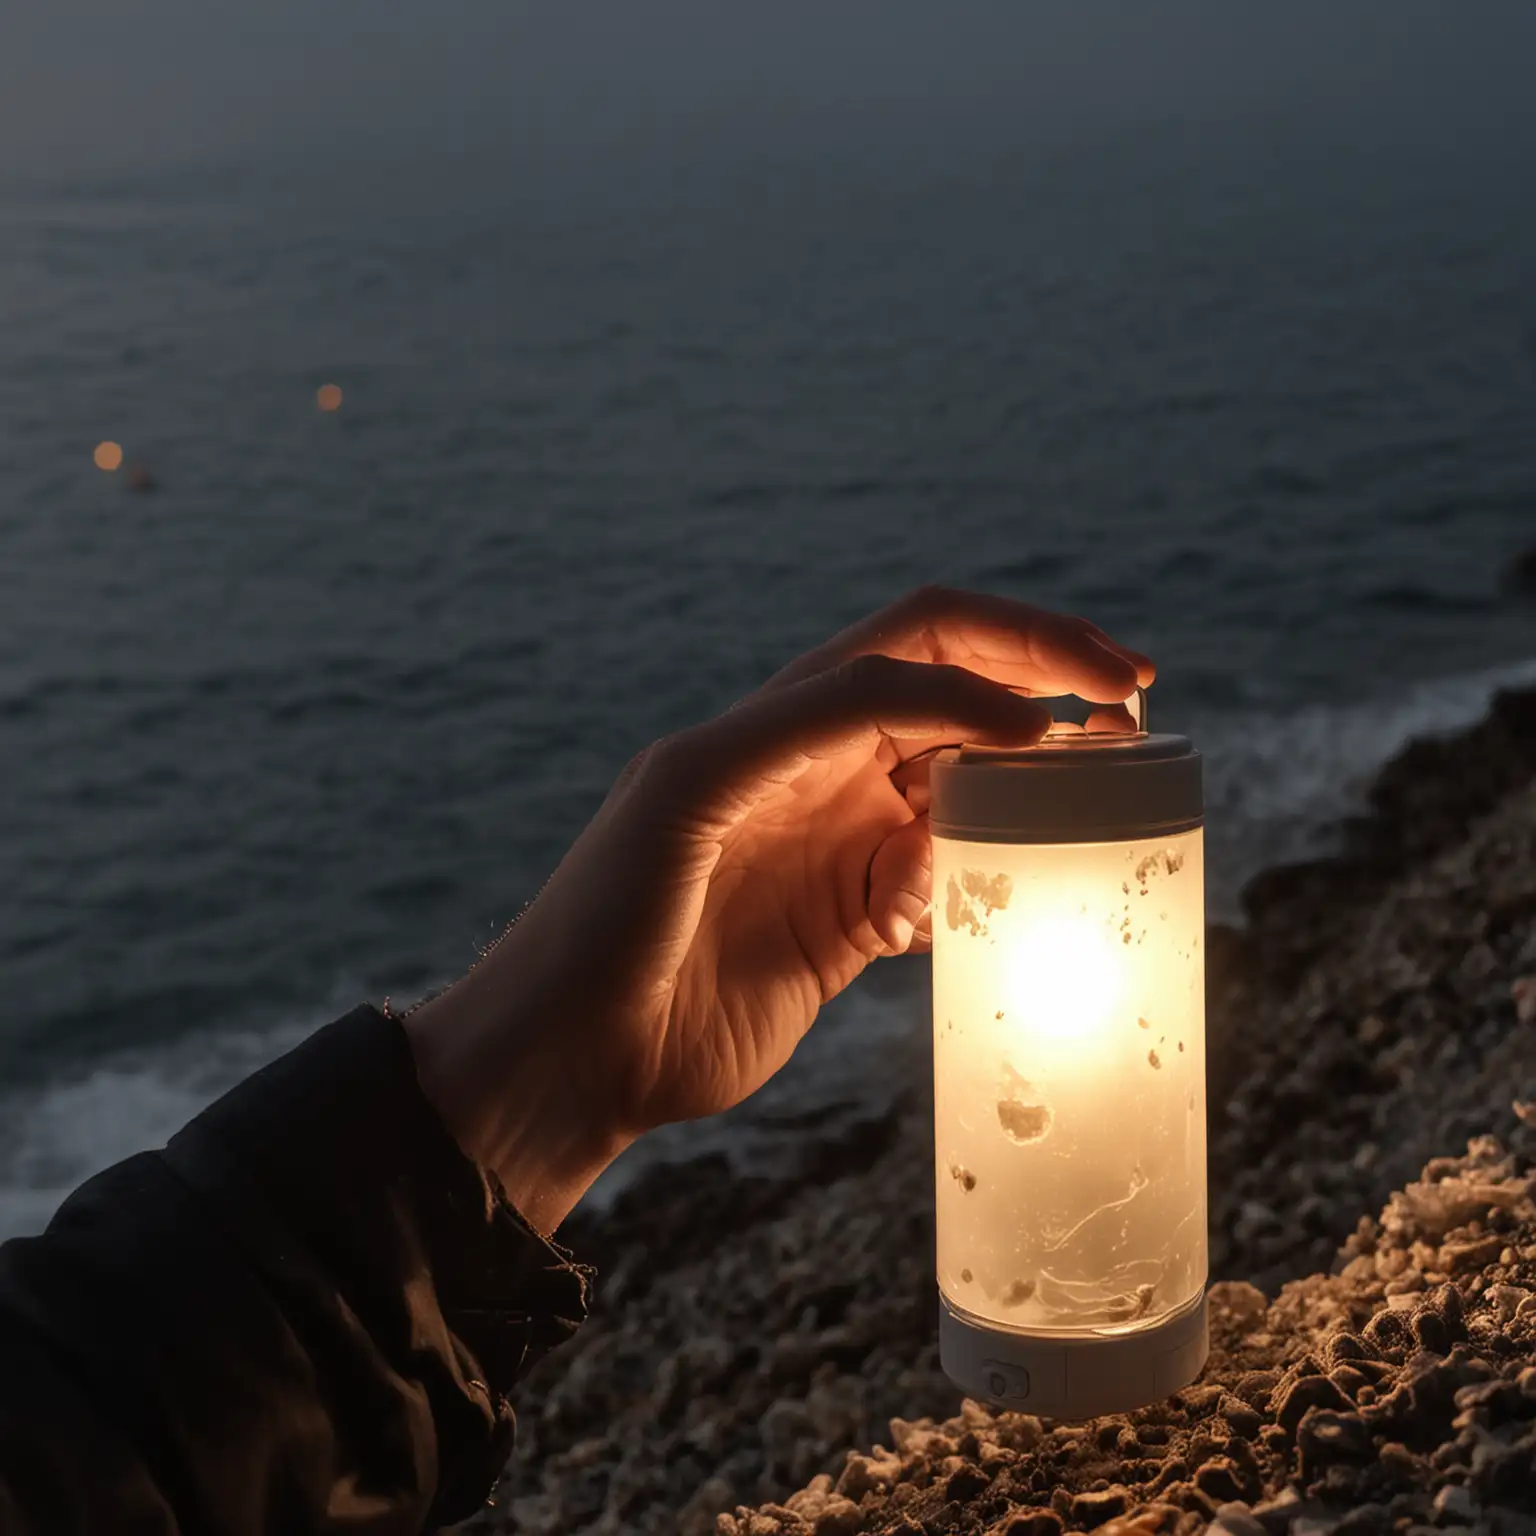 the portable light lamp lighten up near the sea by someone holding it in the night 





